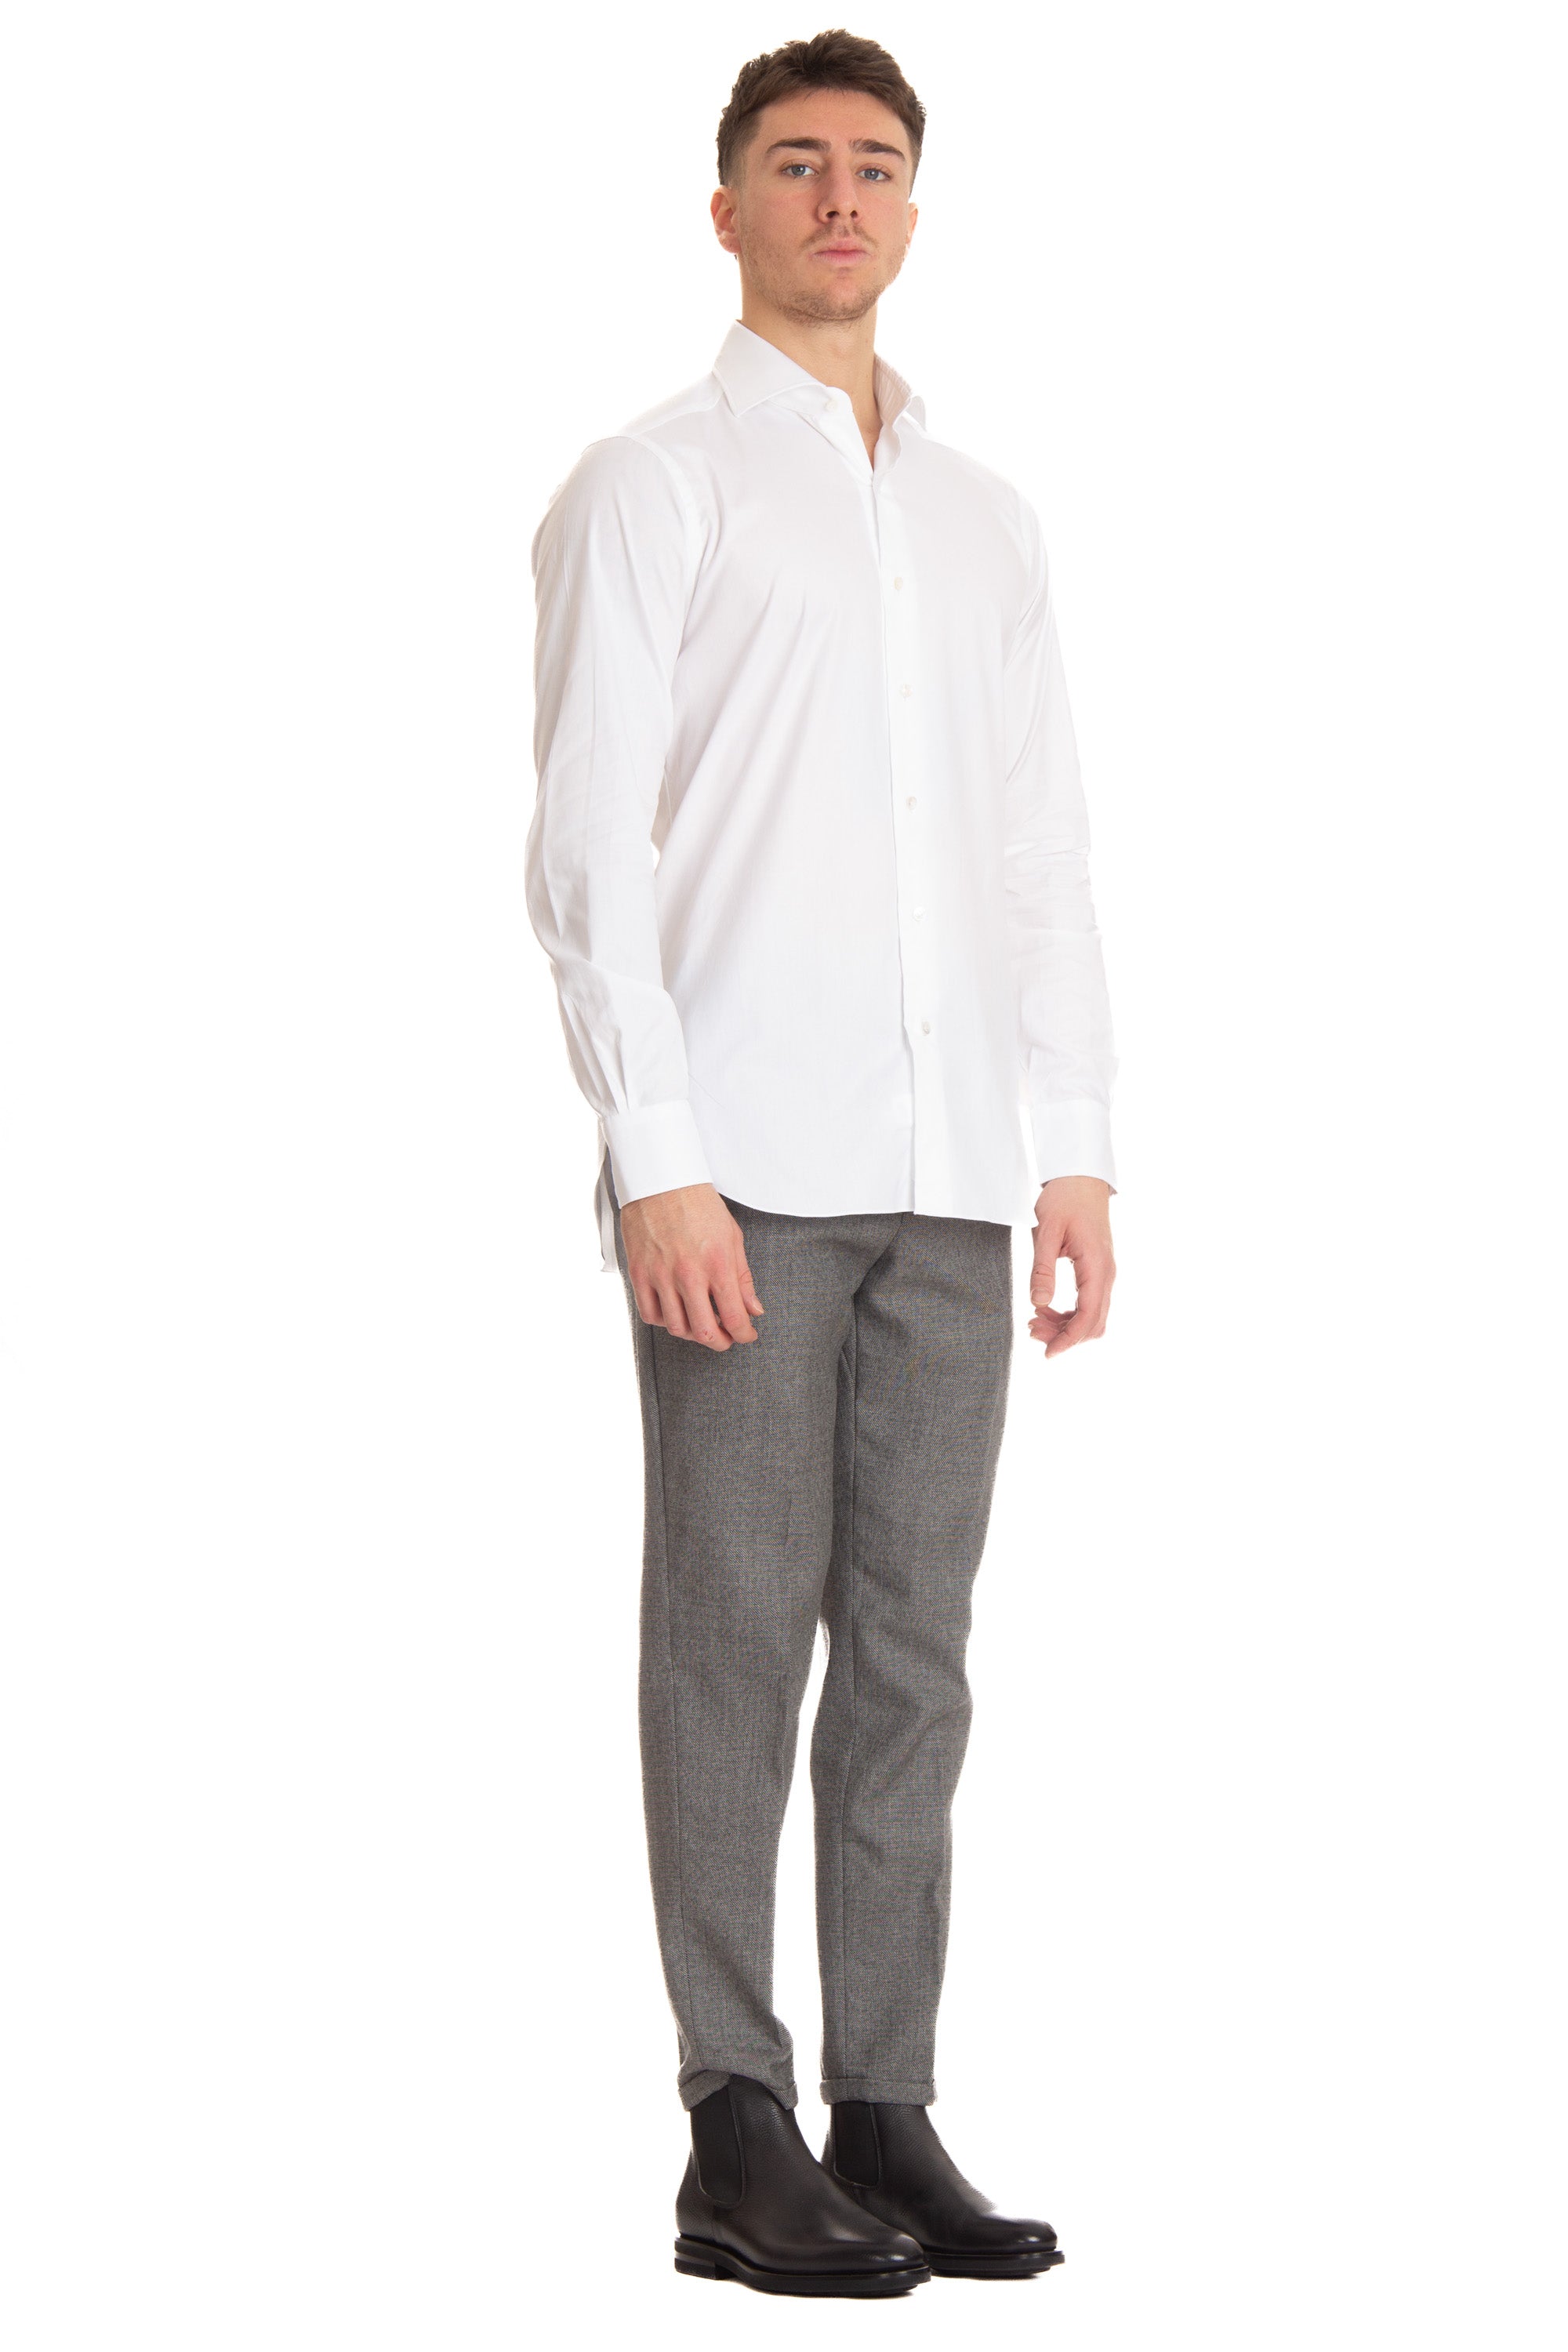 Micro-weave tailored shirt from the Culto line